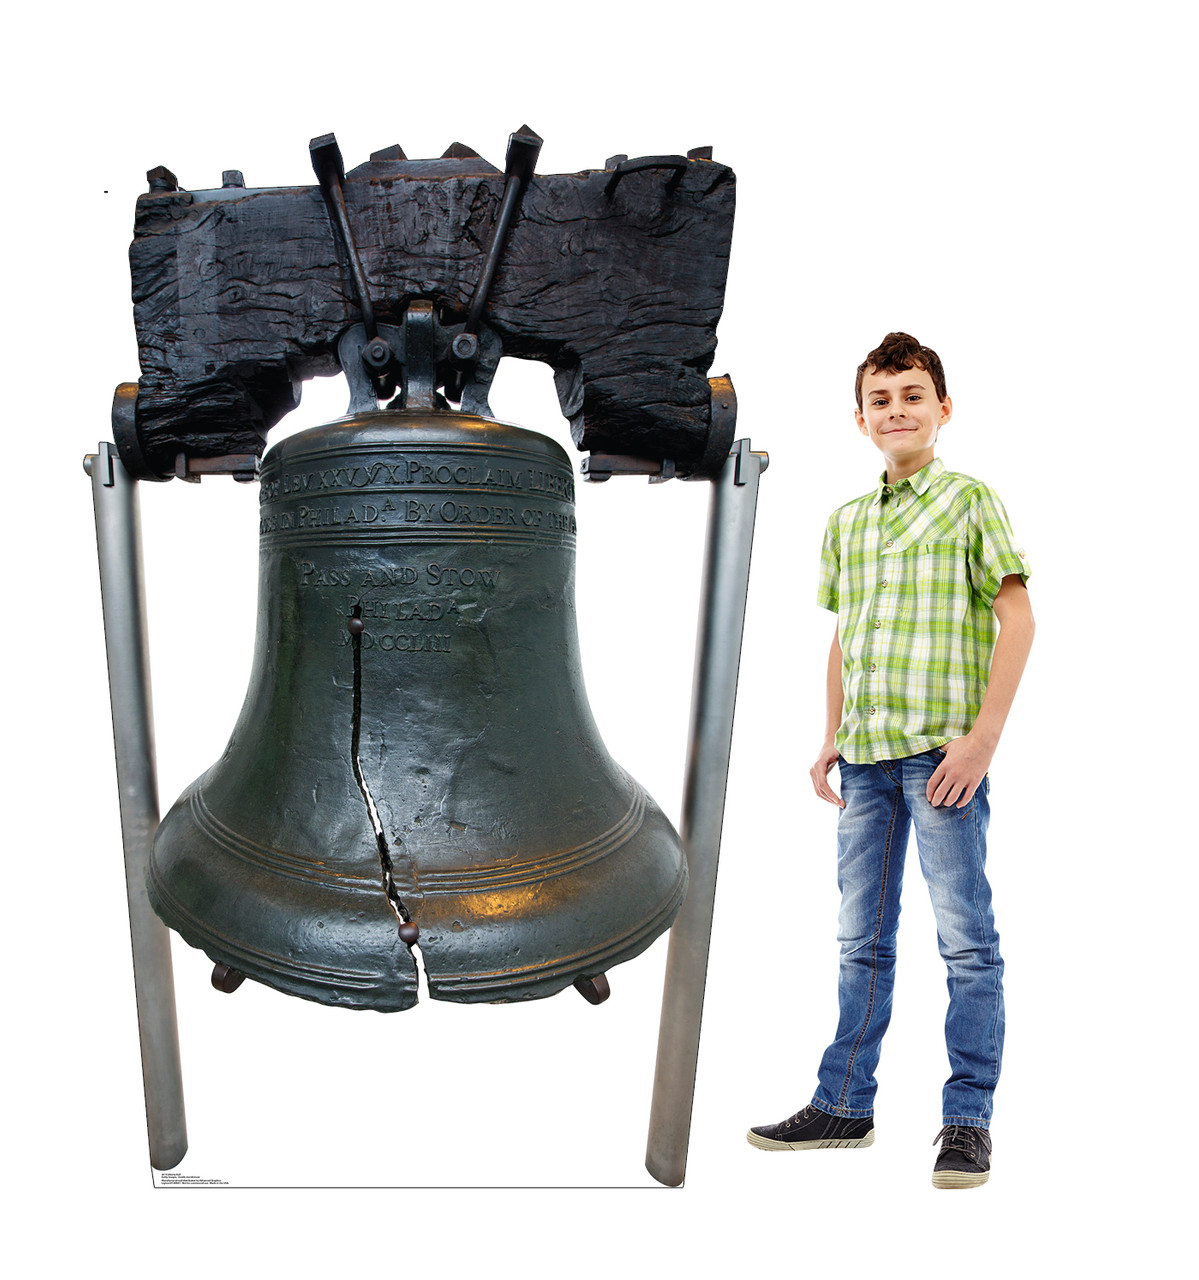 Life-size cardboard standee of the Liberty Bell with model.